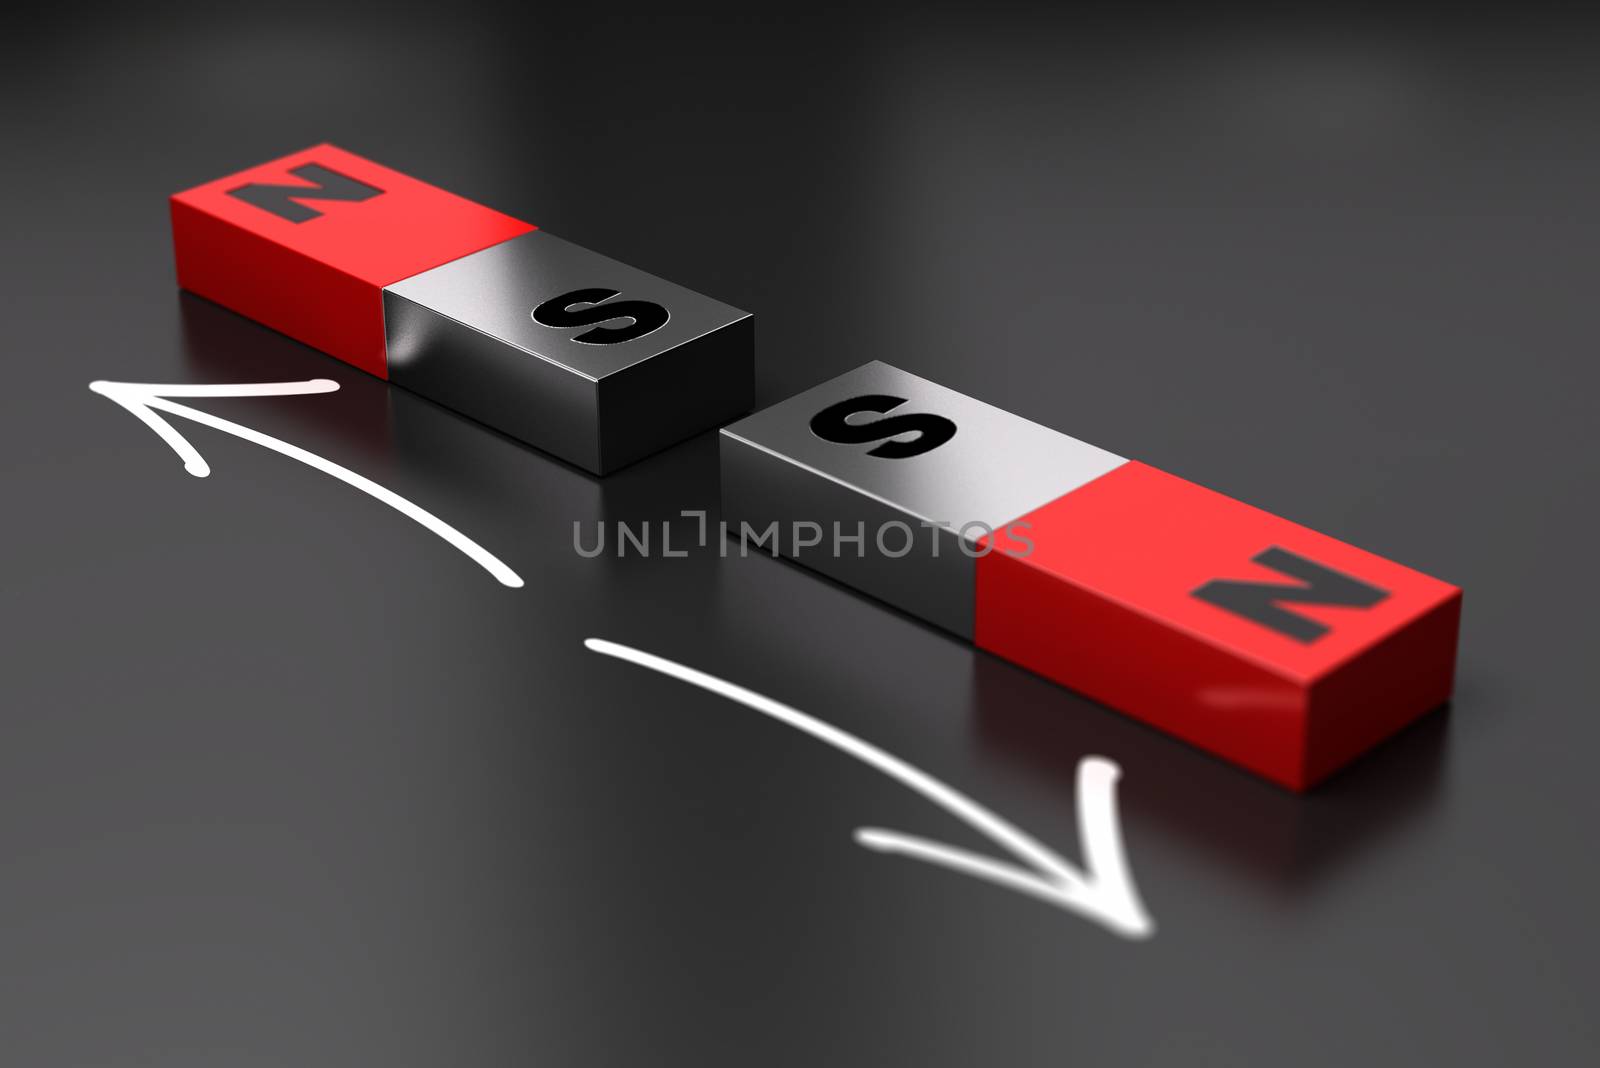 Two dipoles magnets repels eatch other. Black background